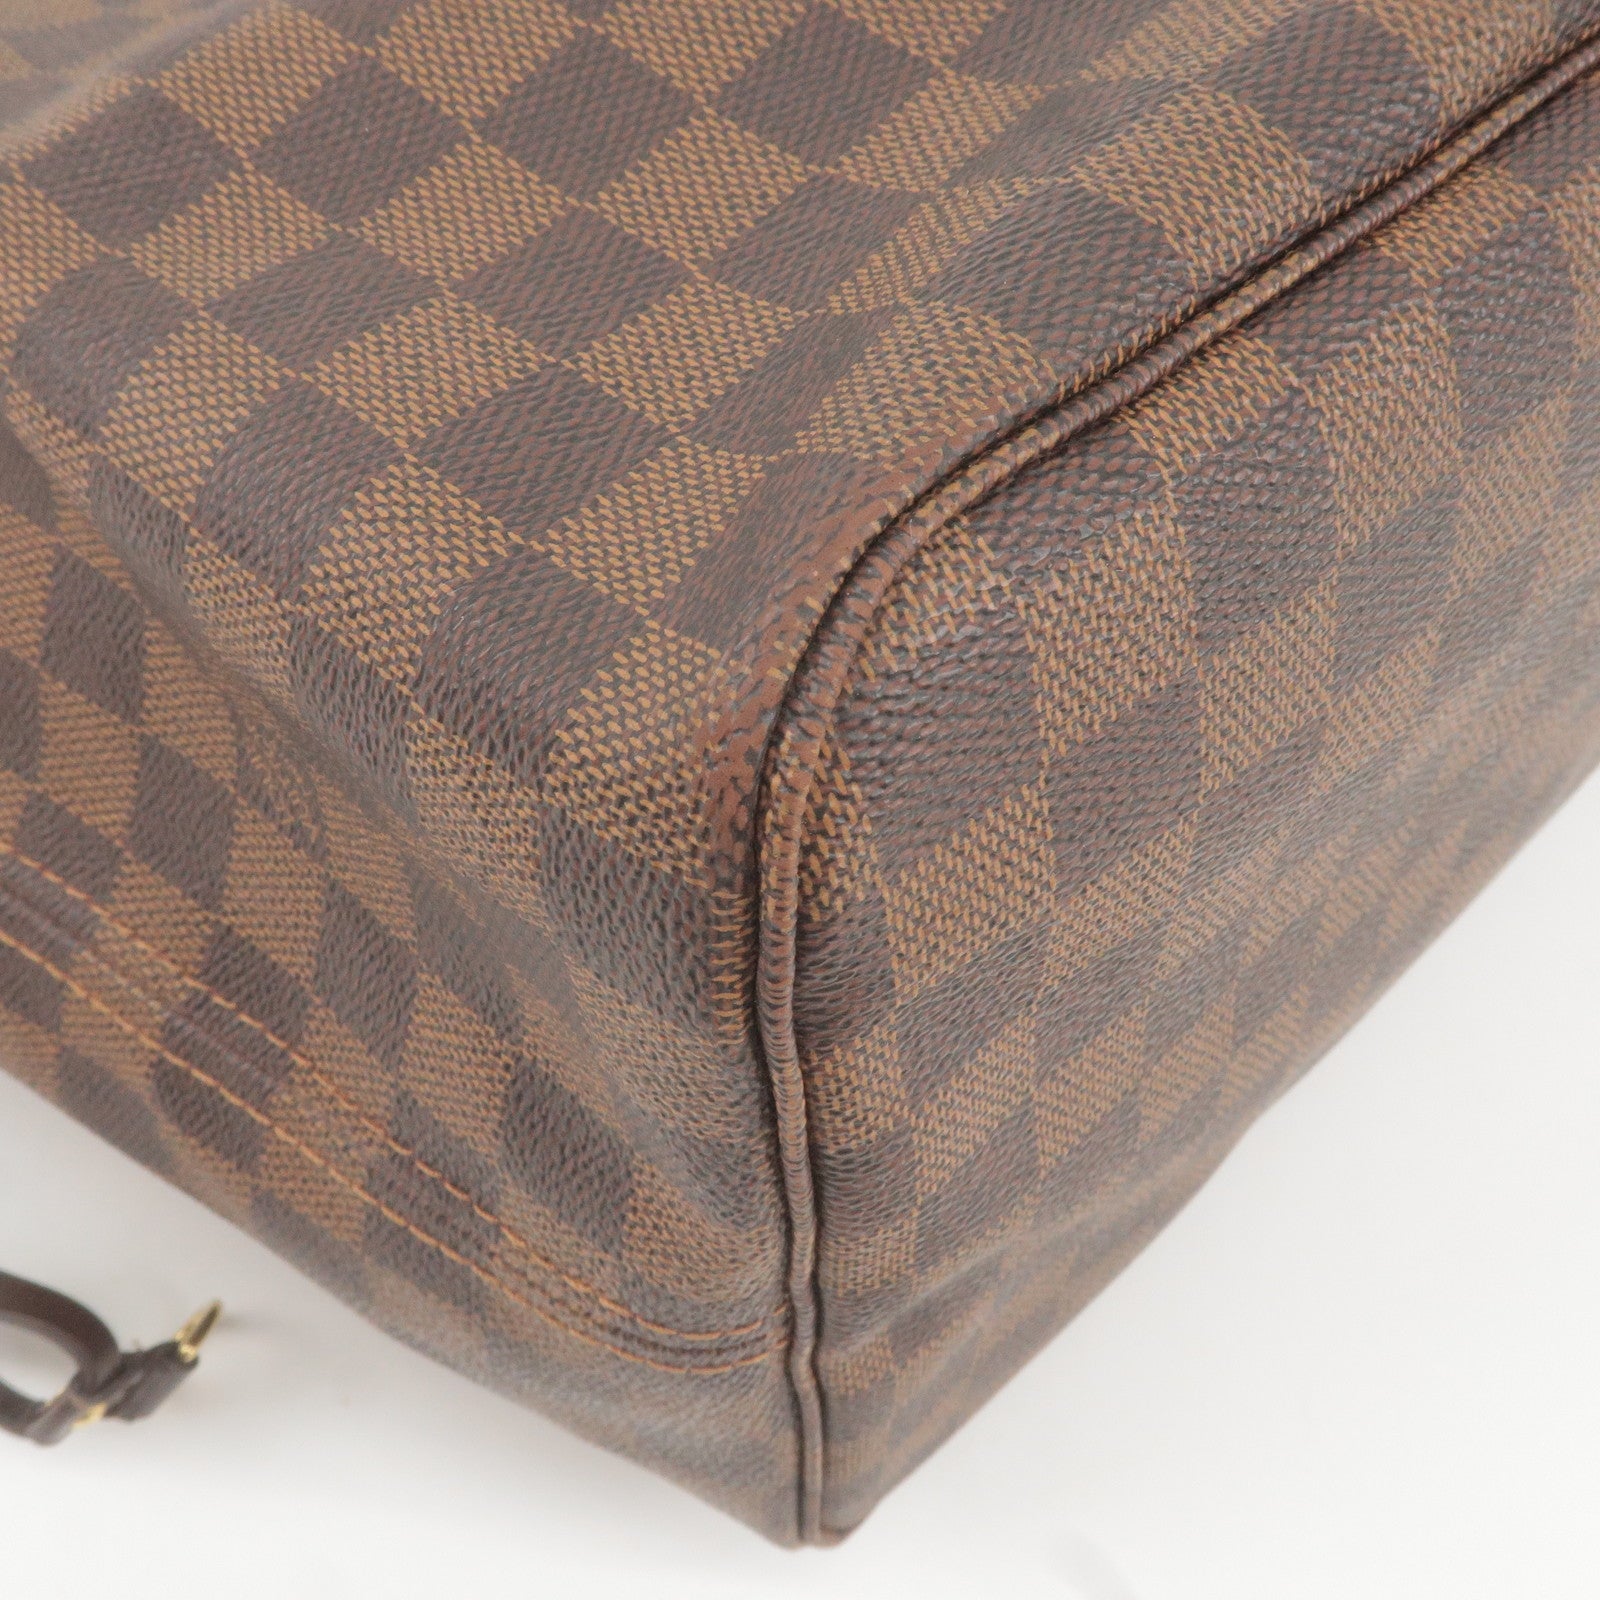 AUTHENTIC LOUIS VUITTON N51106 Damier Ebene Neverfull GM Tote Bag